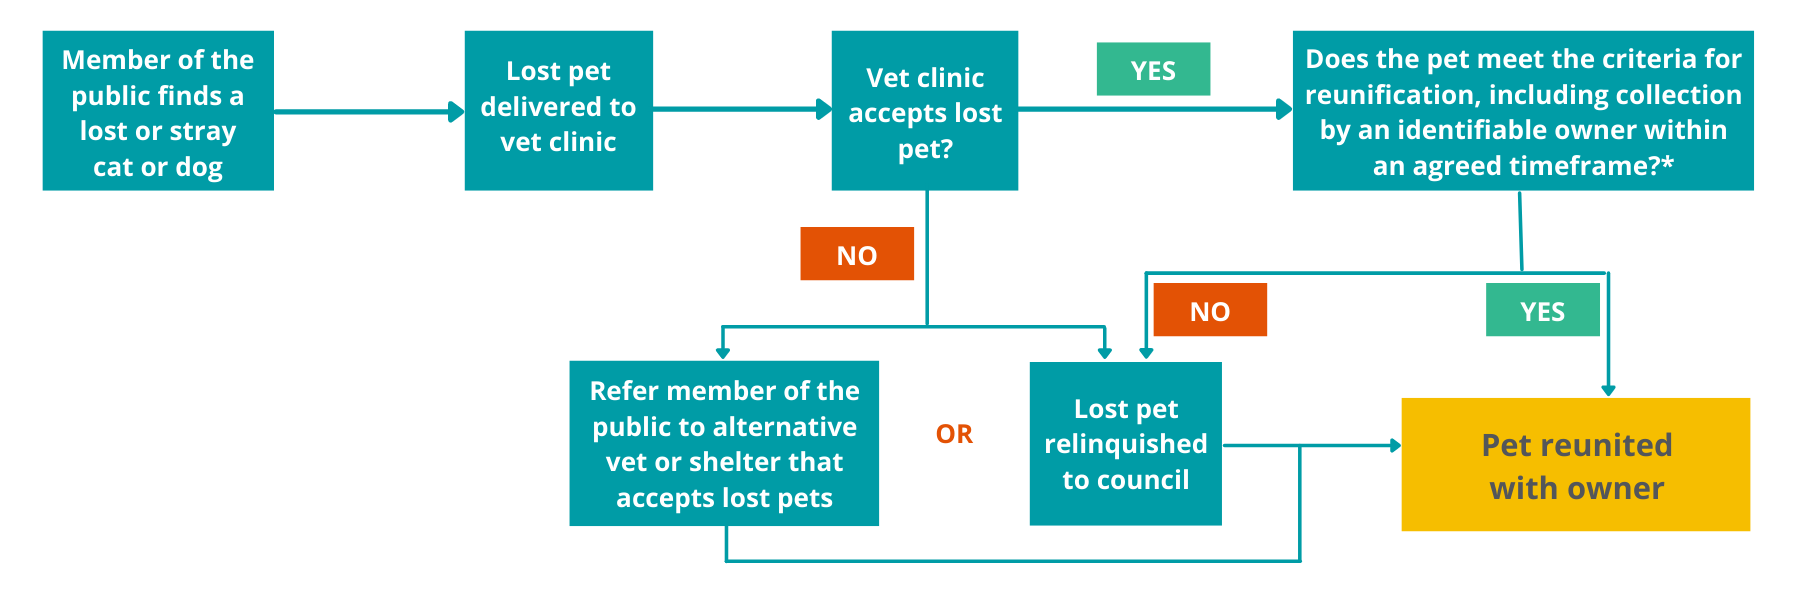 Process for reuniting pets through vets. Further information below image.